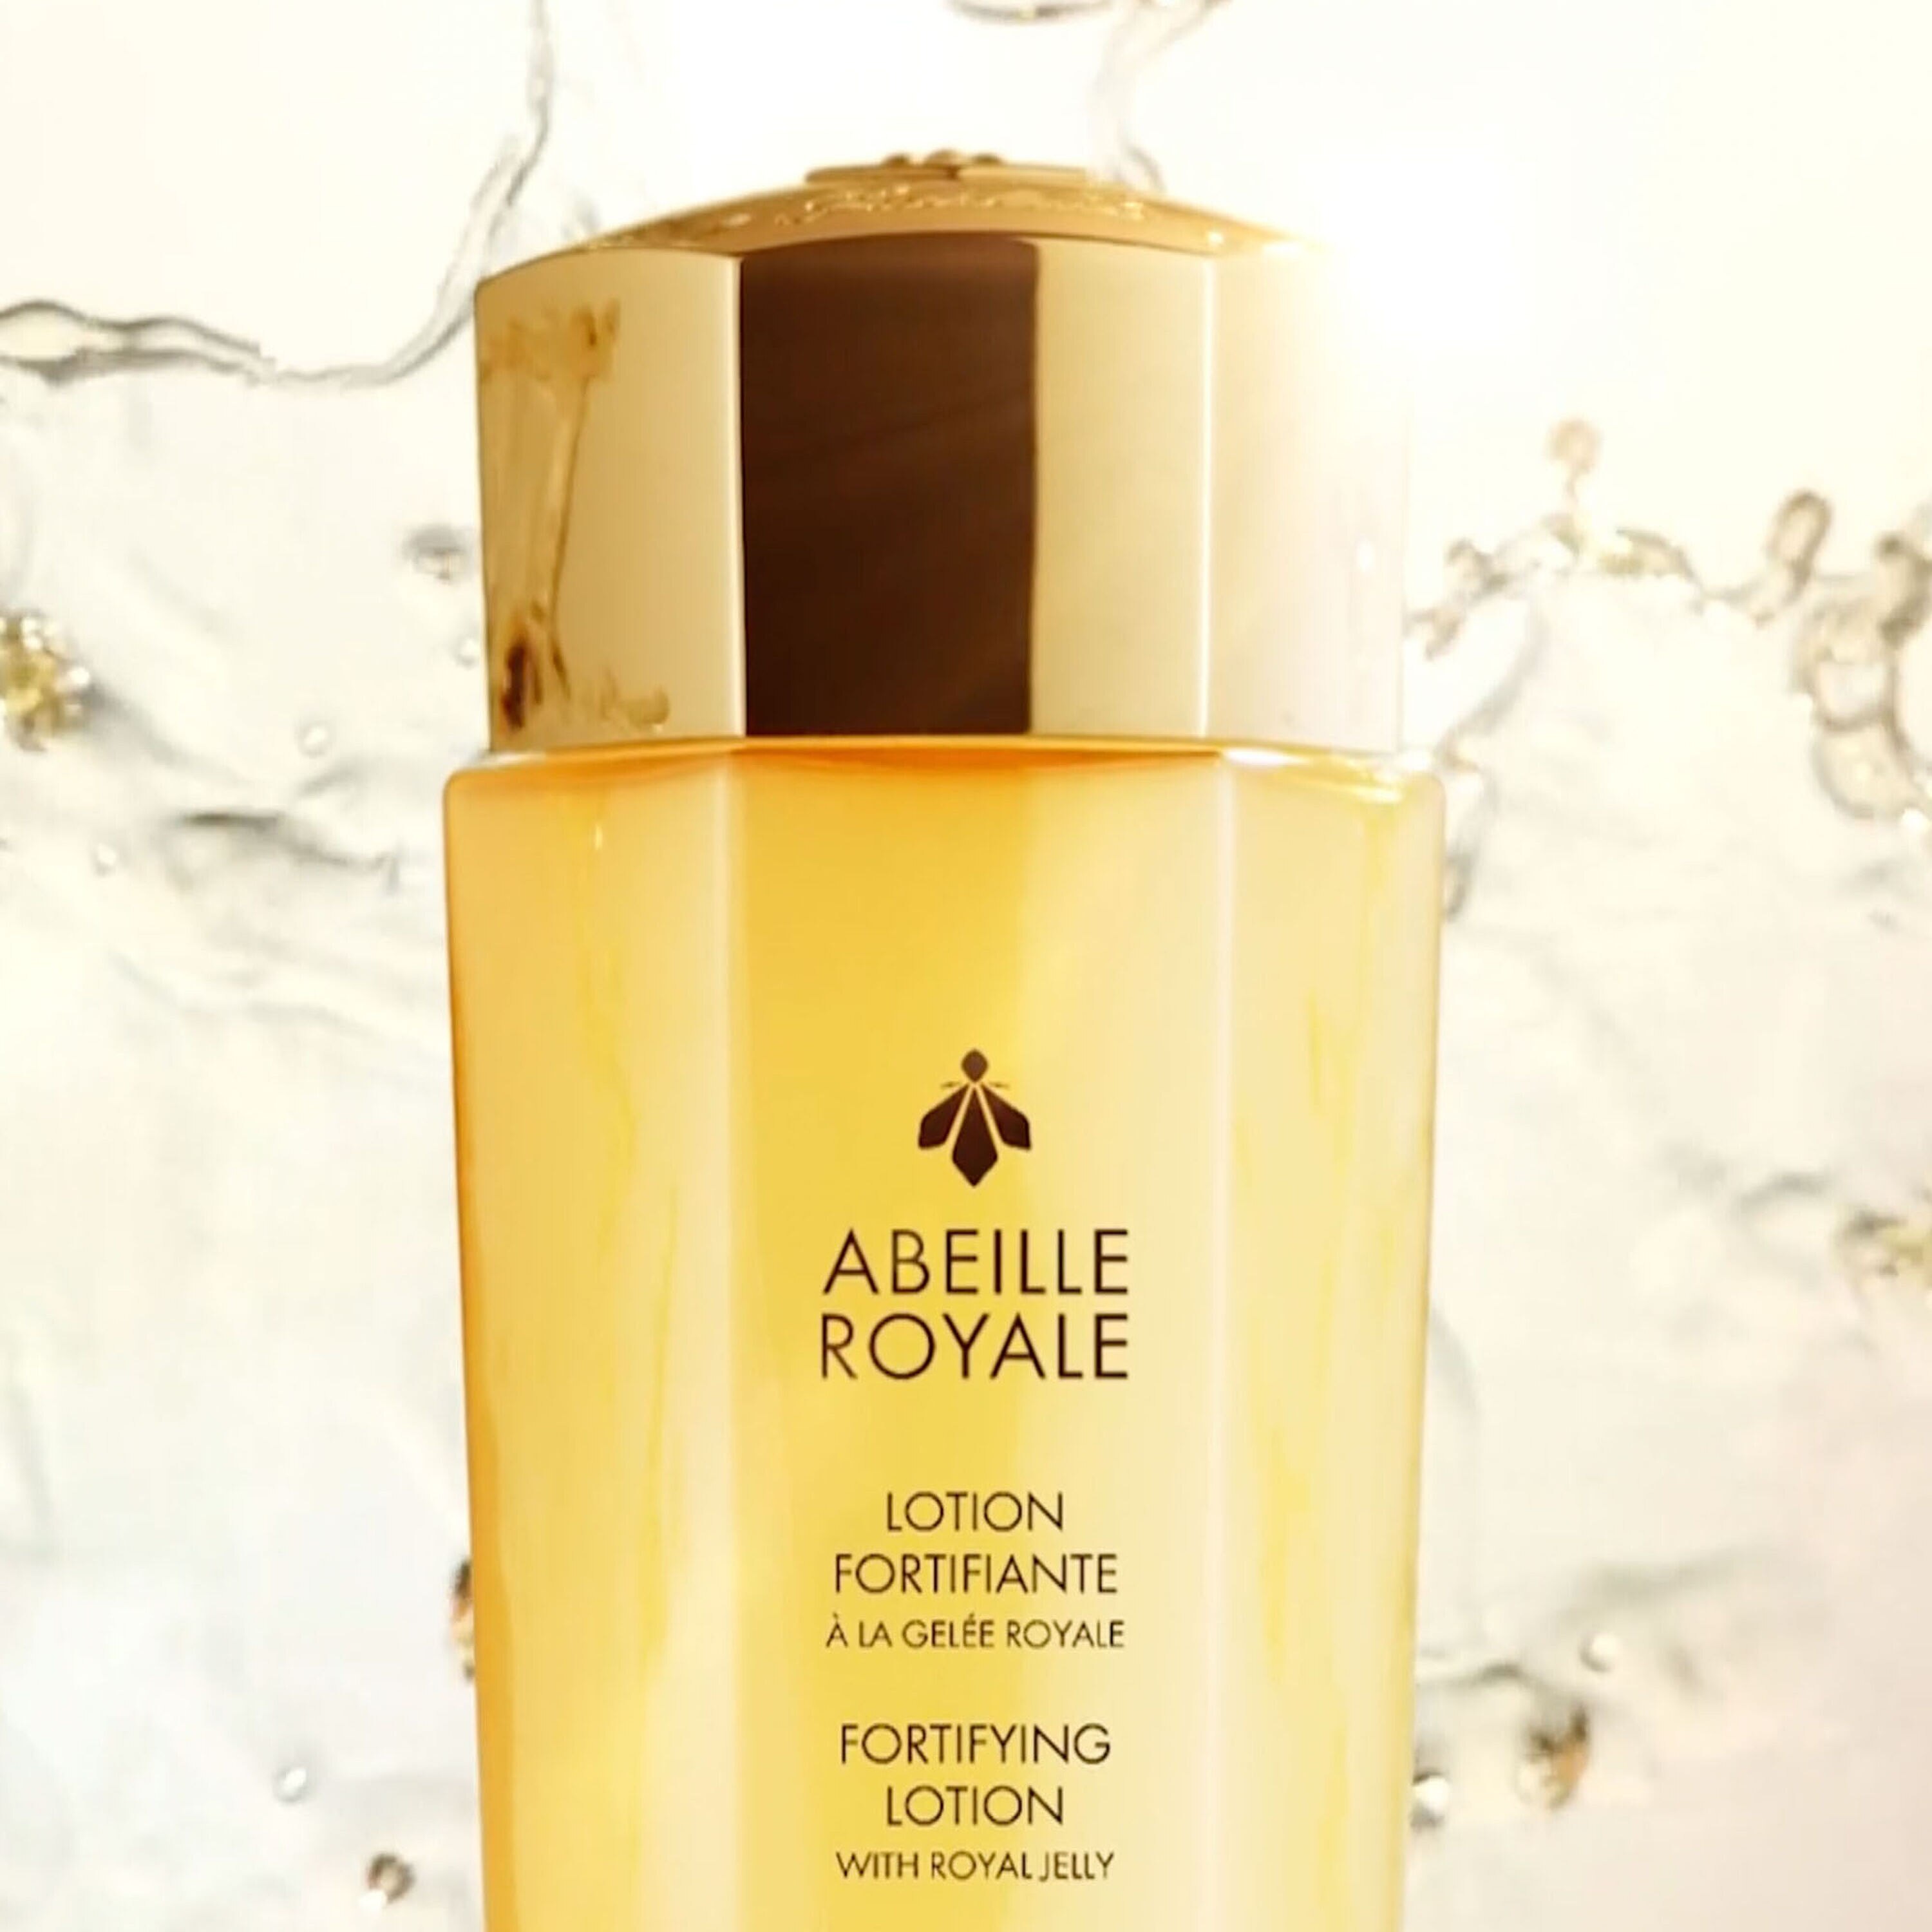 Fortifying Lotion with Royal Jelly (De foto bekijken 2/3)